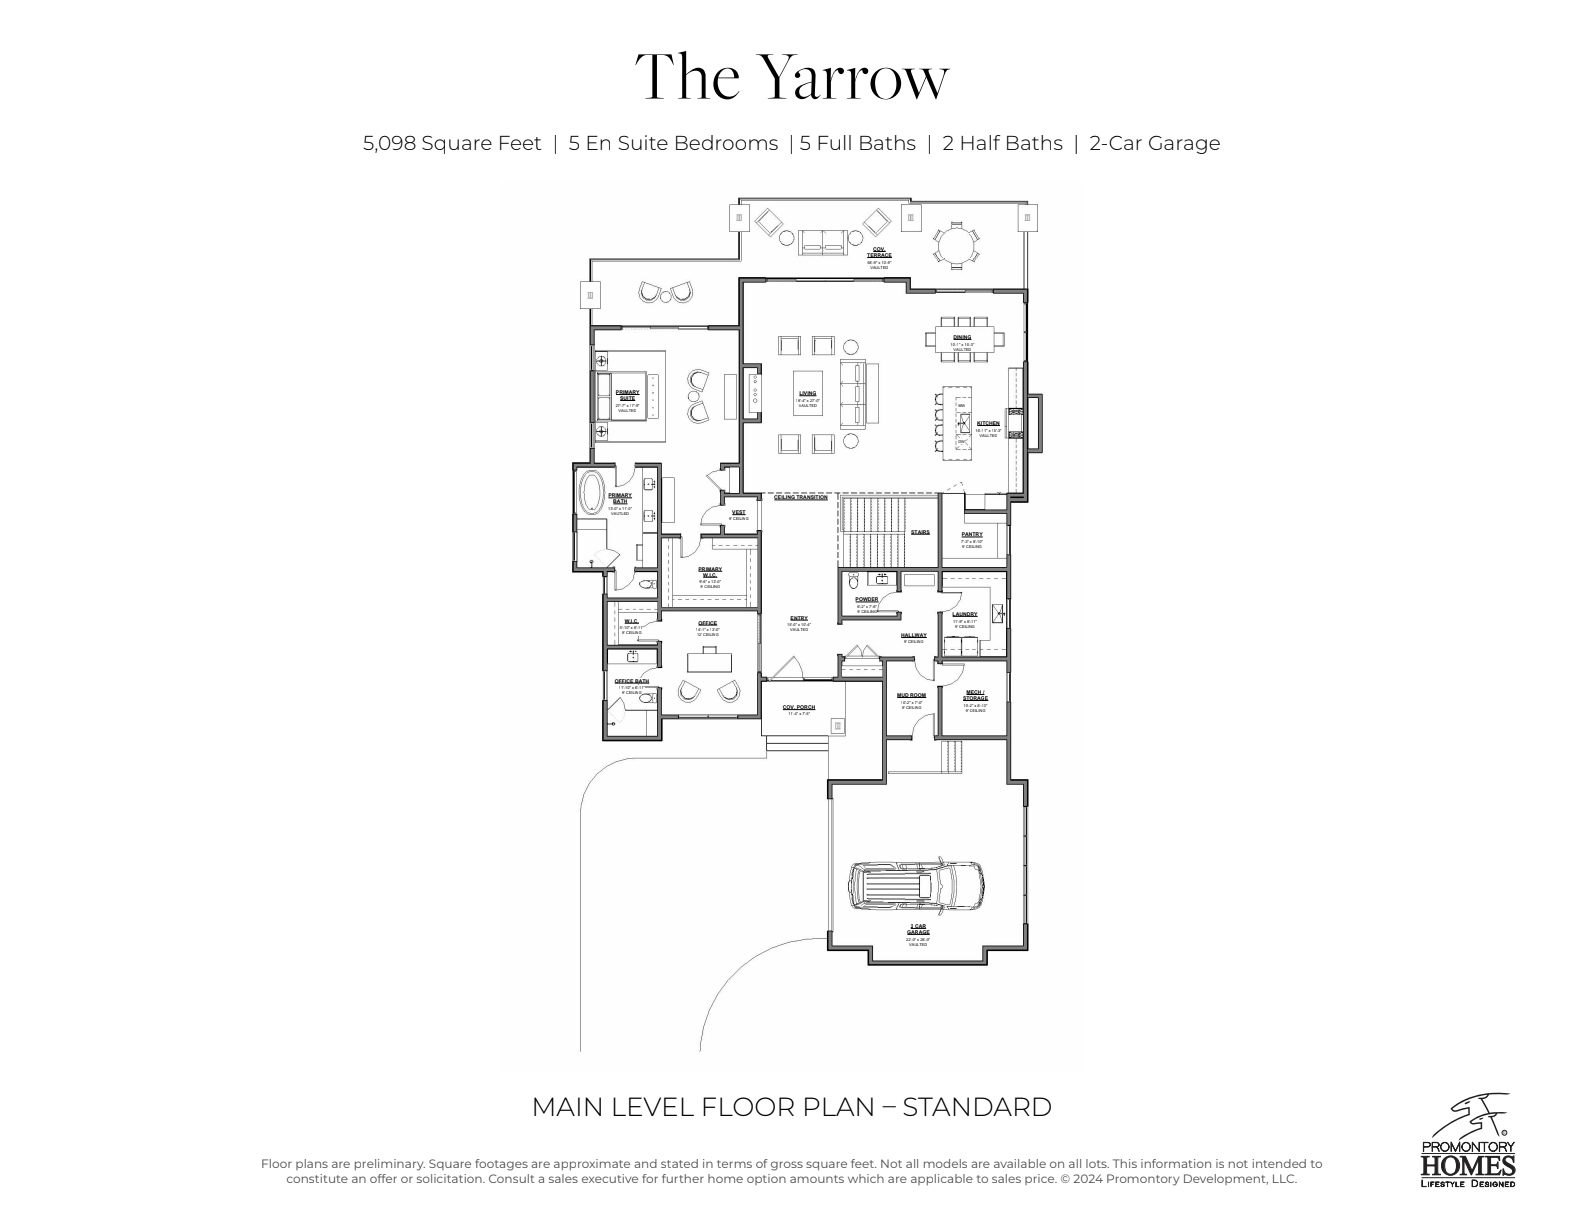 Promontory homes - The Yarrow